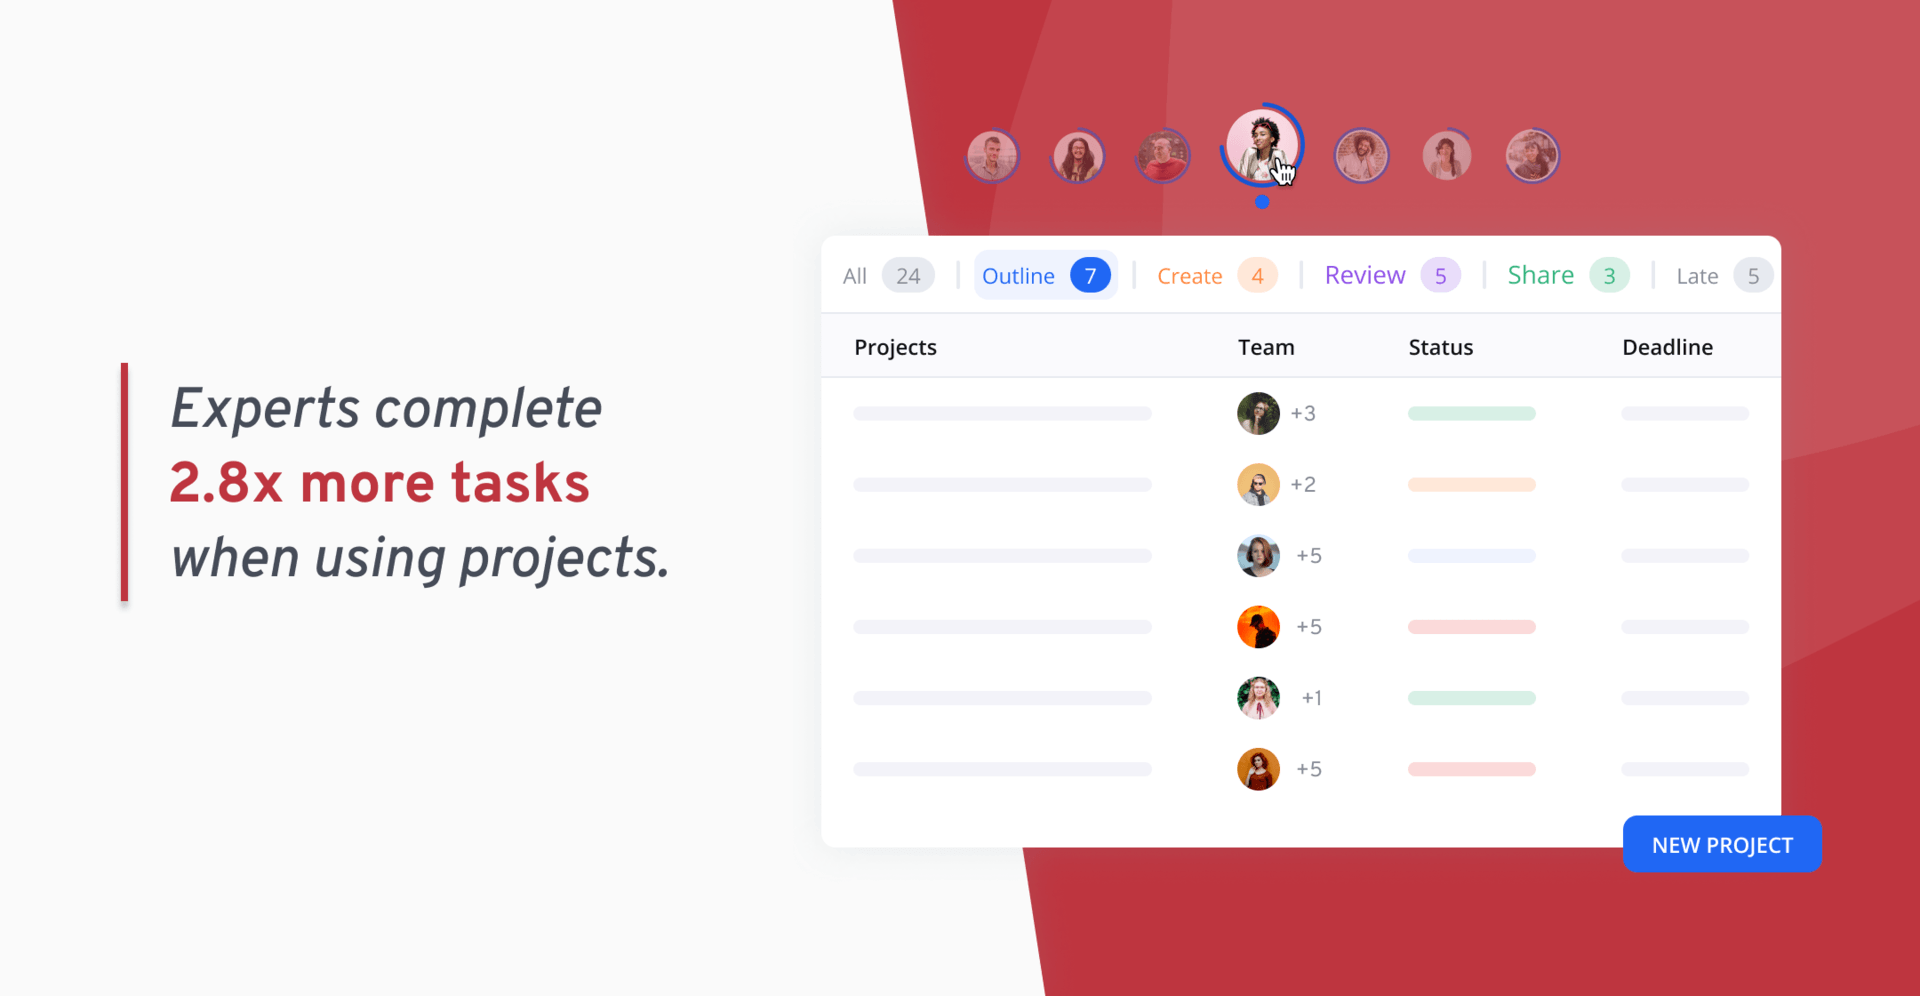 Experts complete 2.8x more tasks when using projects.